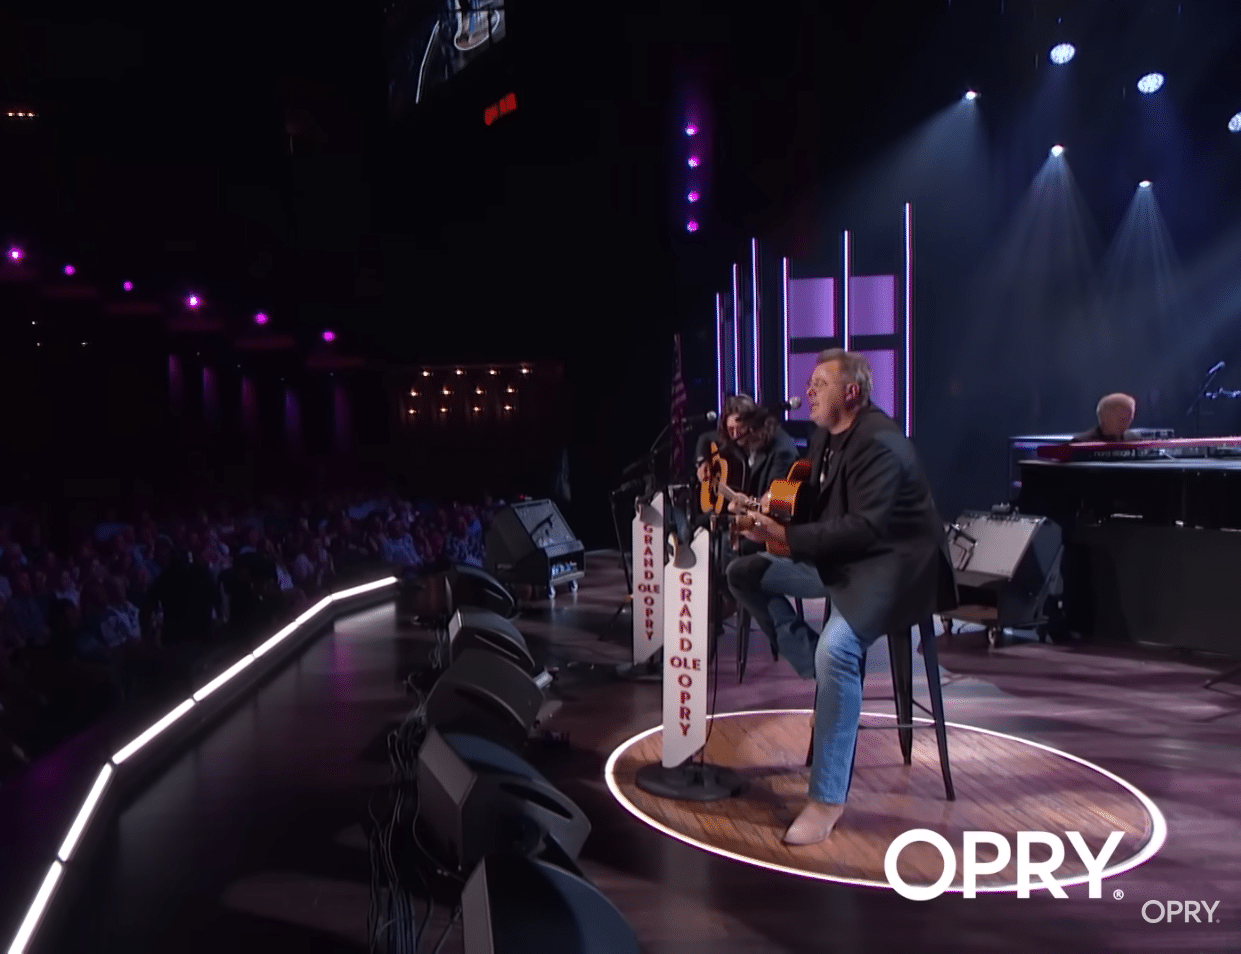 Vince Gill performs "The Whole World" at the Grand Ole Opry